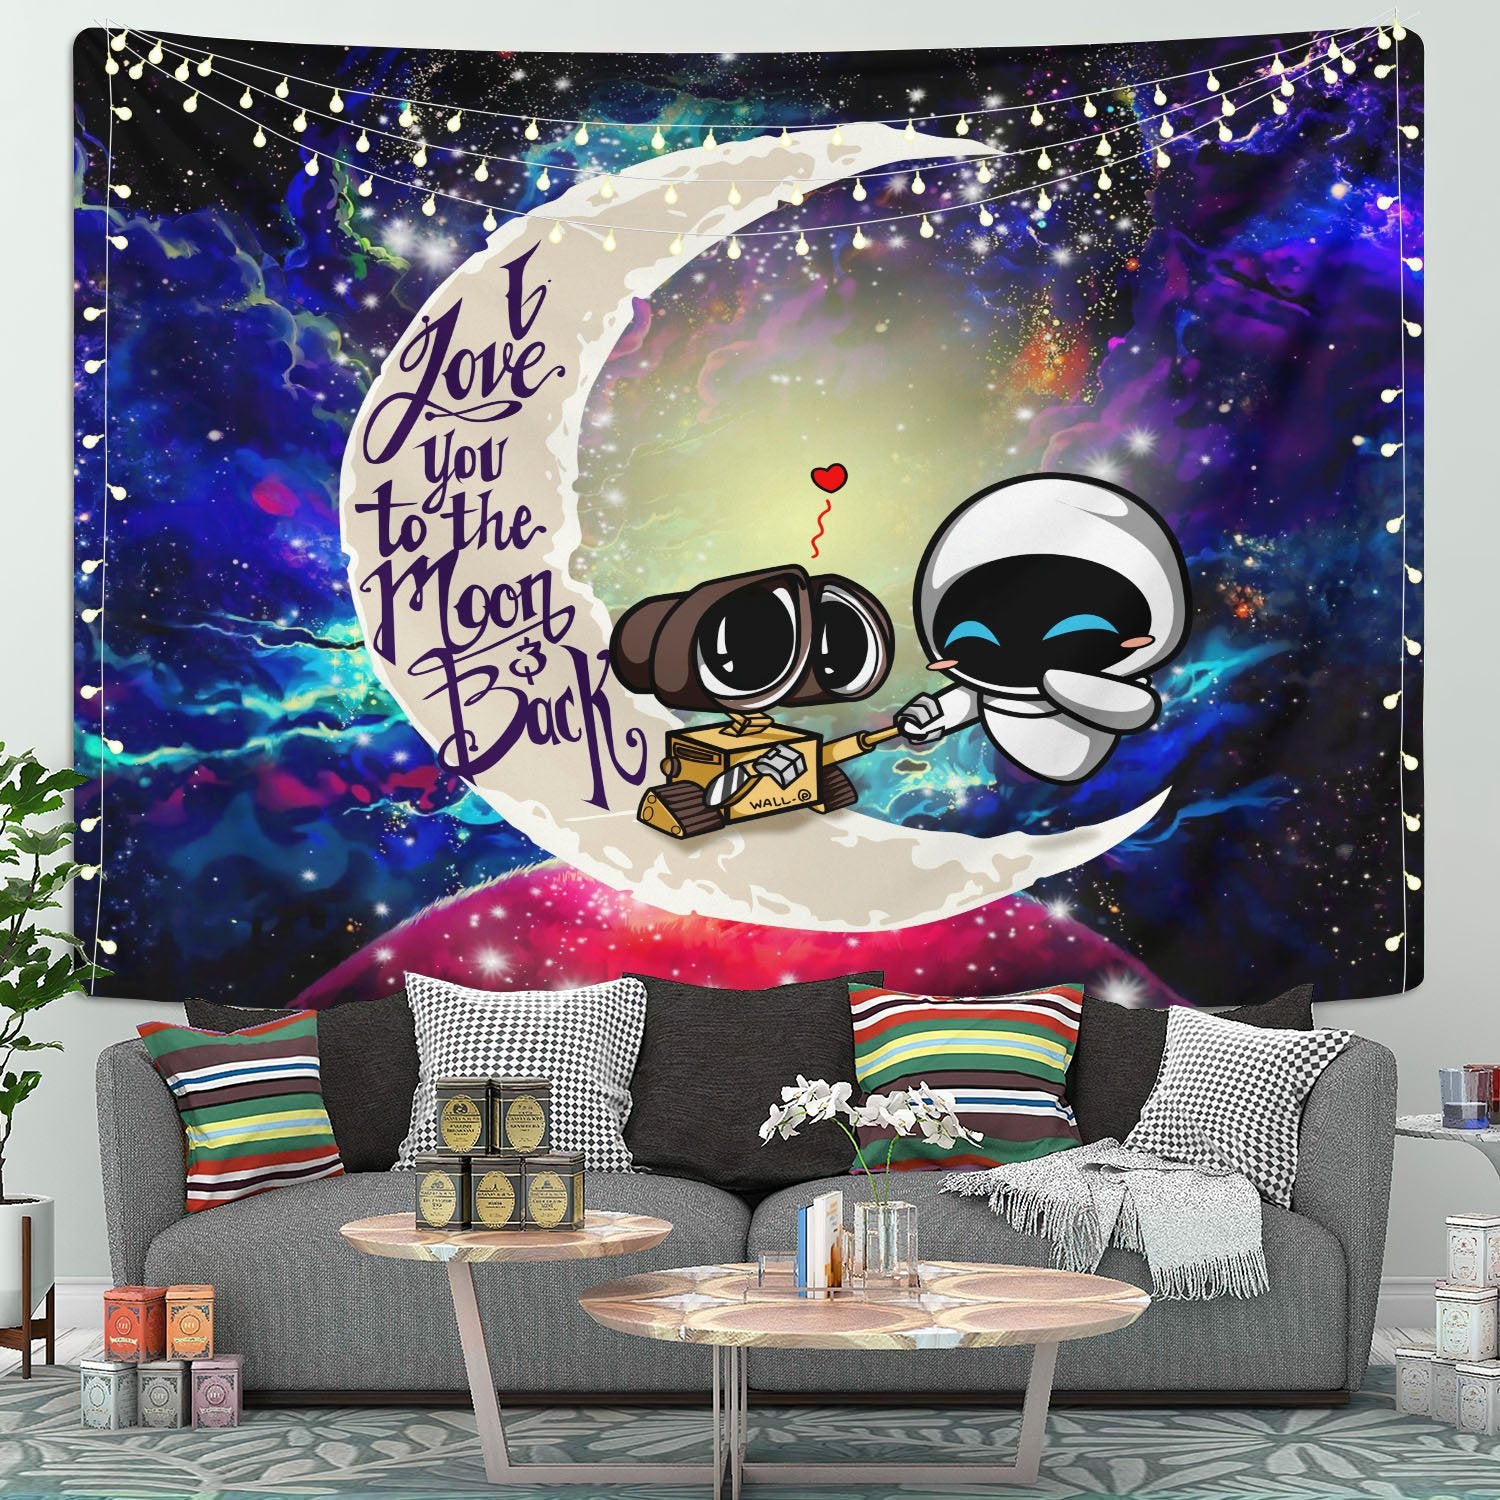 Wall-E Moon And Back Tapestry Room Decor